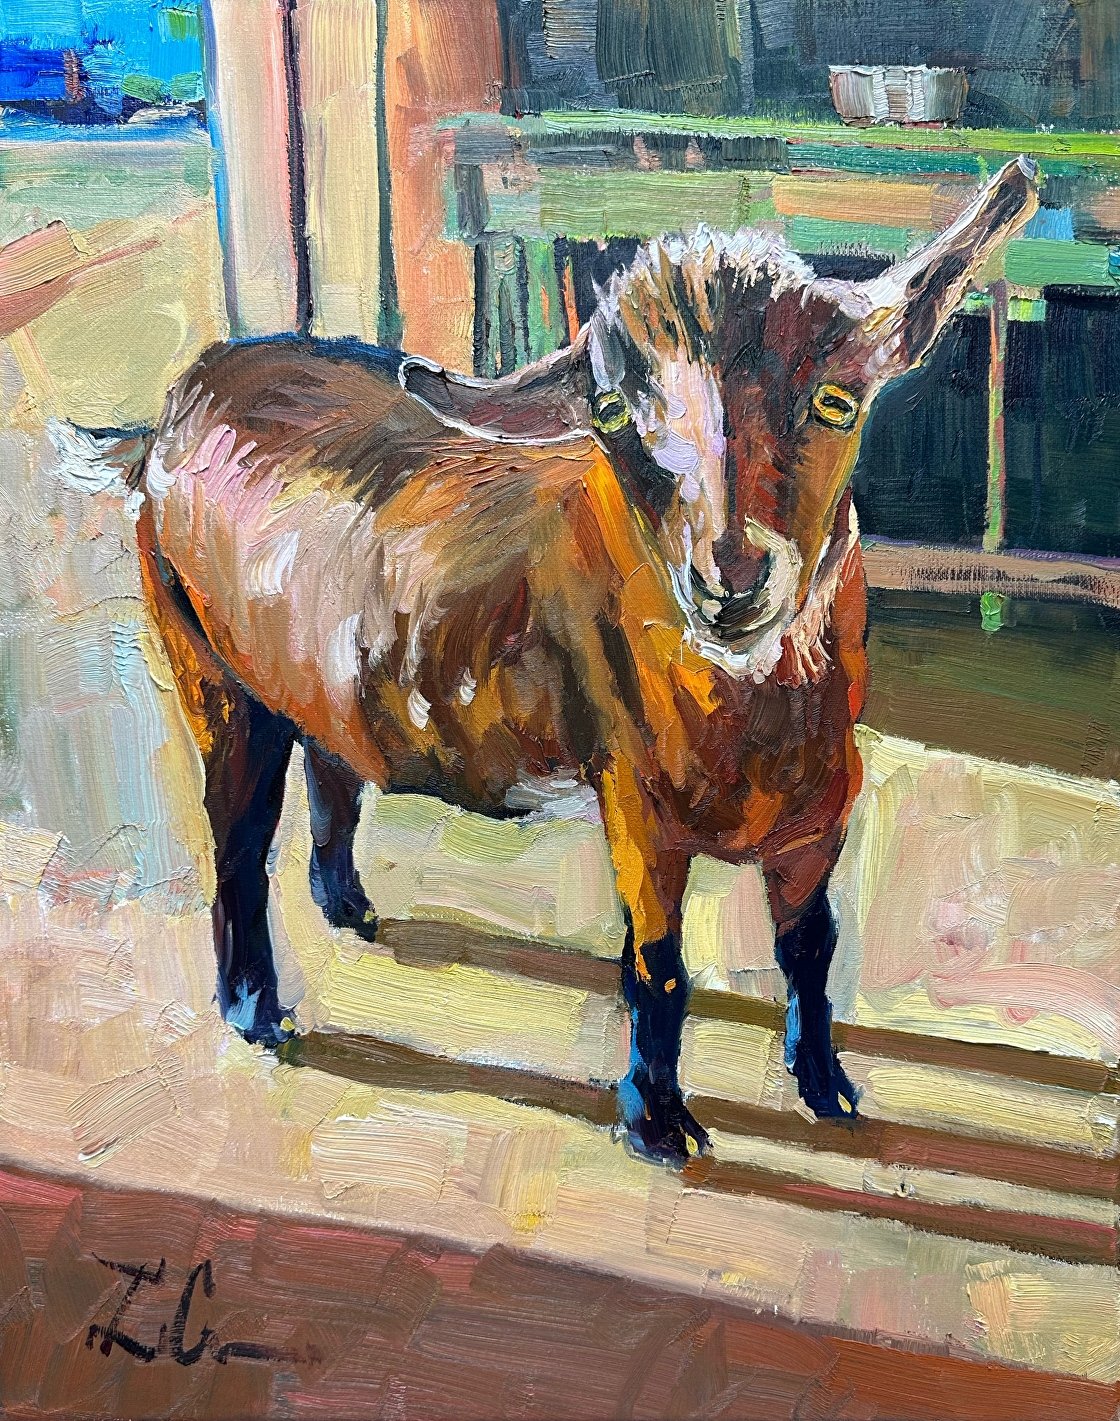    Inquisitive  , 20” x 16”, oil on canvas 